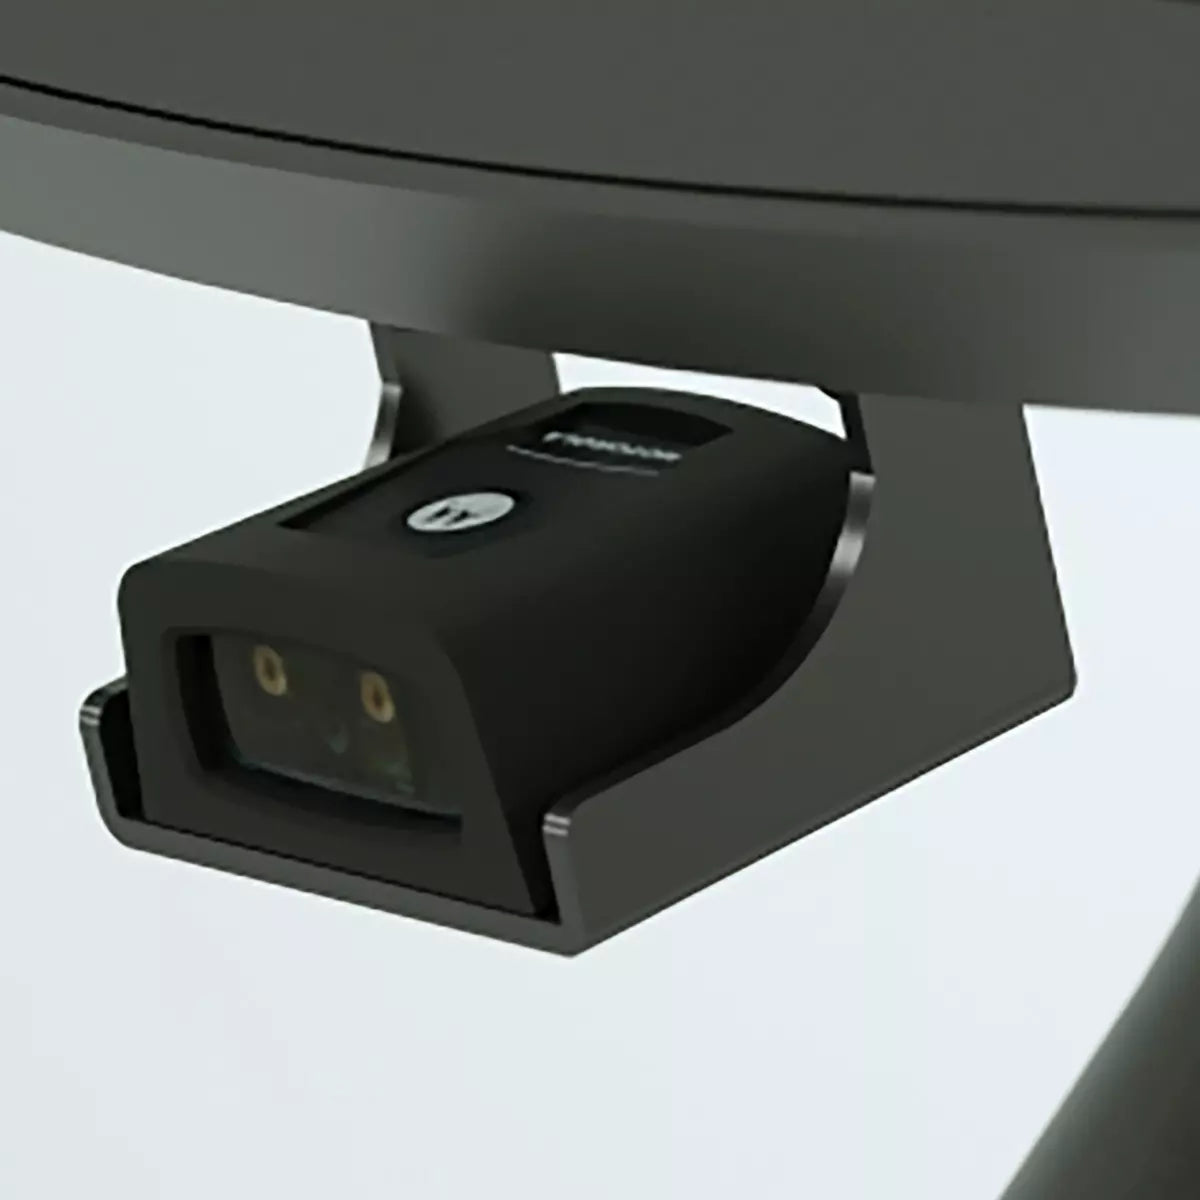 Detailed close up of the front of the Motorola/Zebra DS457 Barcode Scanner Bracket in black.